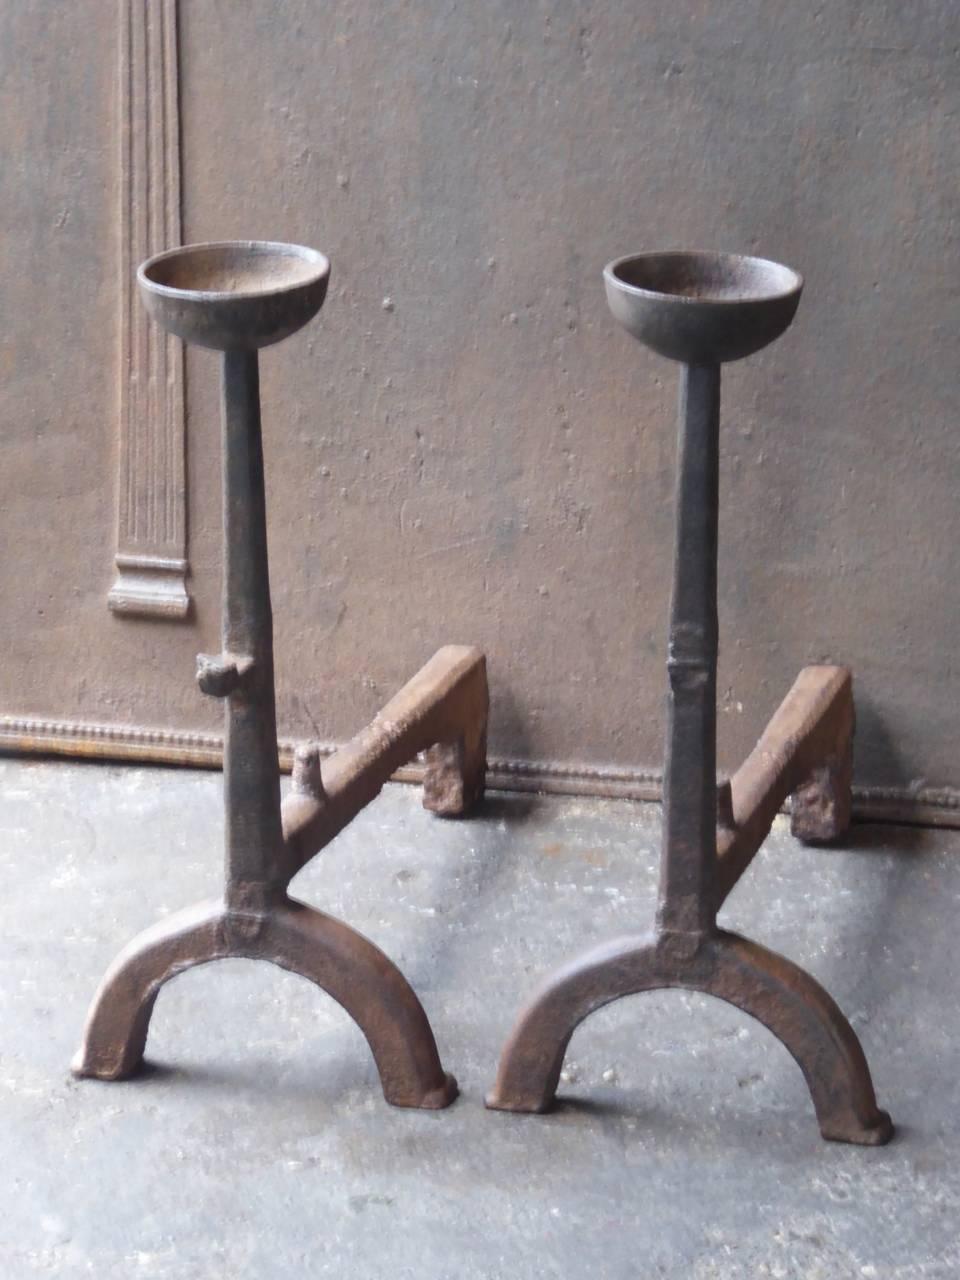 French Gothic style andirons made of cast iron. With a cup to keep drinks or soup warm. This type of fire dogs is also called cup dogs.

We have a unique and specialized collection of antique and used fireplace accessories consisting of more than